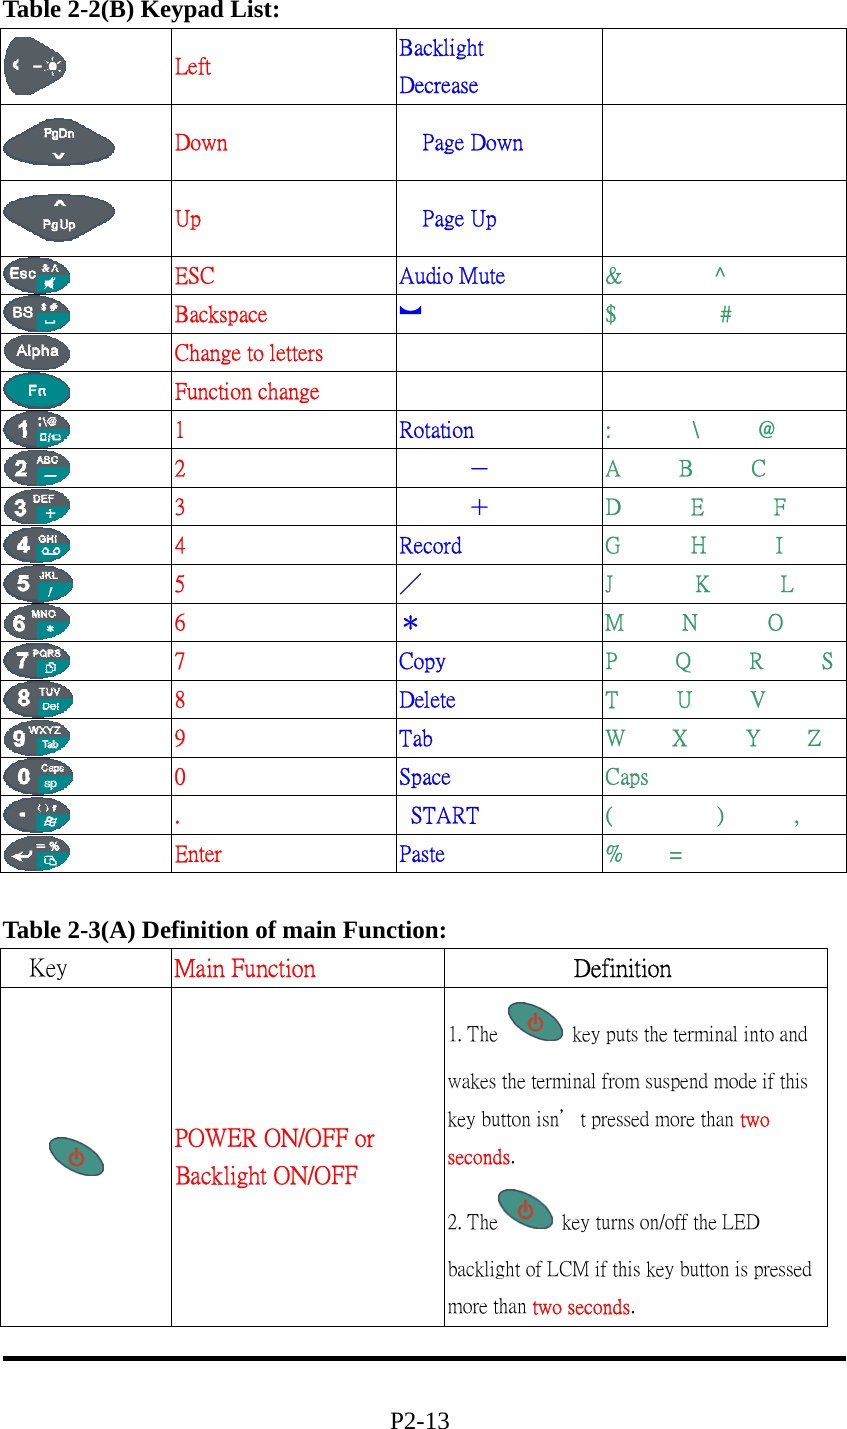 Table 2-2(B) Keypad List:  Left  Backlight   Decrease     Down    Page Down     Up    Page Up     ESC  Audio Mute  &amp;        ^  Backspace  ︼  $         #  Change to letters        Function change        1  Rotation  :       \     @  2     －  A     B     C  3     ＋   D      E      F  4  Record  G      H      I  5  ／  J       K      L  6  ＊  M     N      O  7  Copy  P     Q     R     S  8  Delete  T     U     V  9  Tab  W    X     Y    Z  0  Space  Caps  .   START  (         )      ,  Enter  Paste  %    =  Table 2-3(A) Definition of main Function:  Key  Main Function            Definition  POWER ON/OFF or Backlight ON/OFF 1. The    key puts the terminal into and wakes the terminal from suspend mode if this key button isn＇t pressed more than two seconds.                             2. The   key turns on/off the LED backlight of LCM if this key button is pressed more than two seconds.                                                    P2-13 